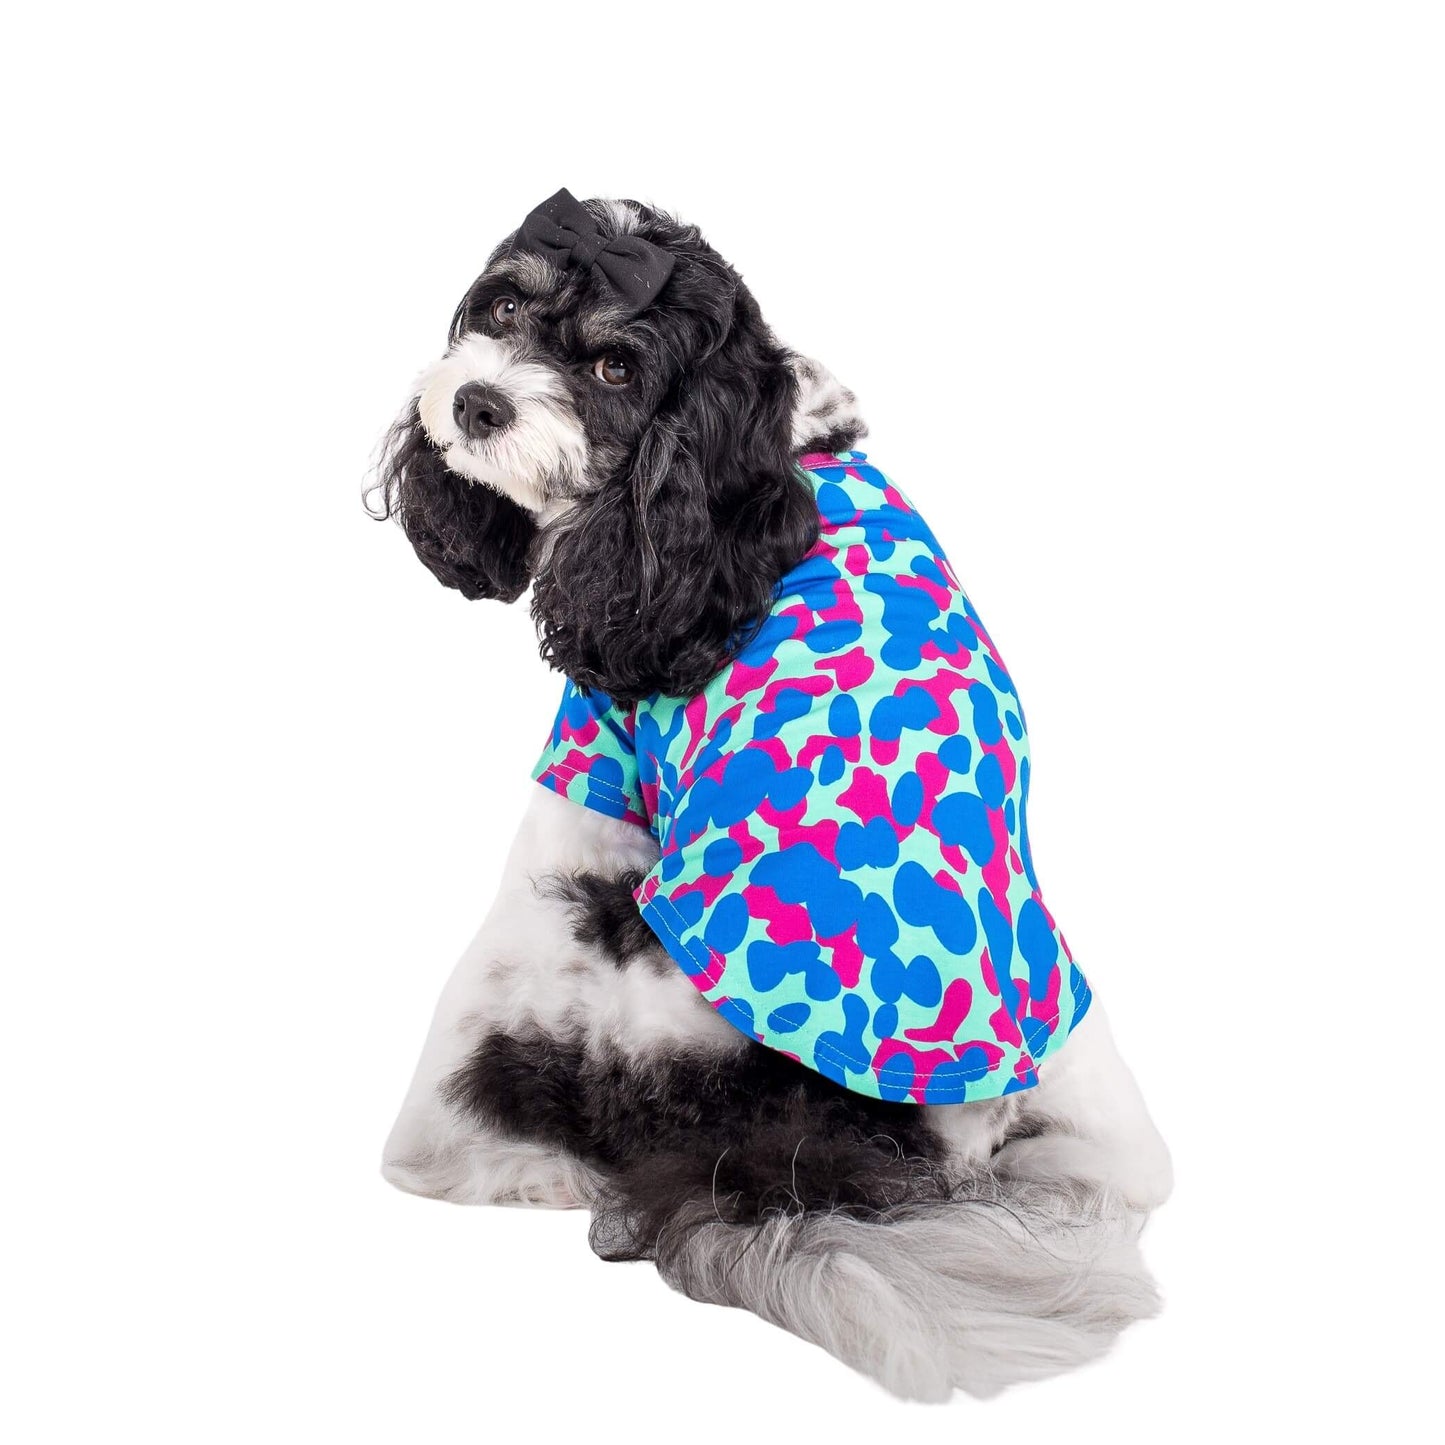 A Cavoodle facing back on to the camera. It is wearing a Painted on dog shirt made by Vibrant Hound. The print is pink and blue blobs.